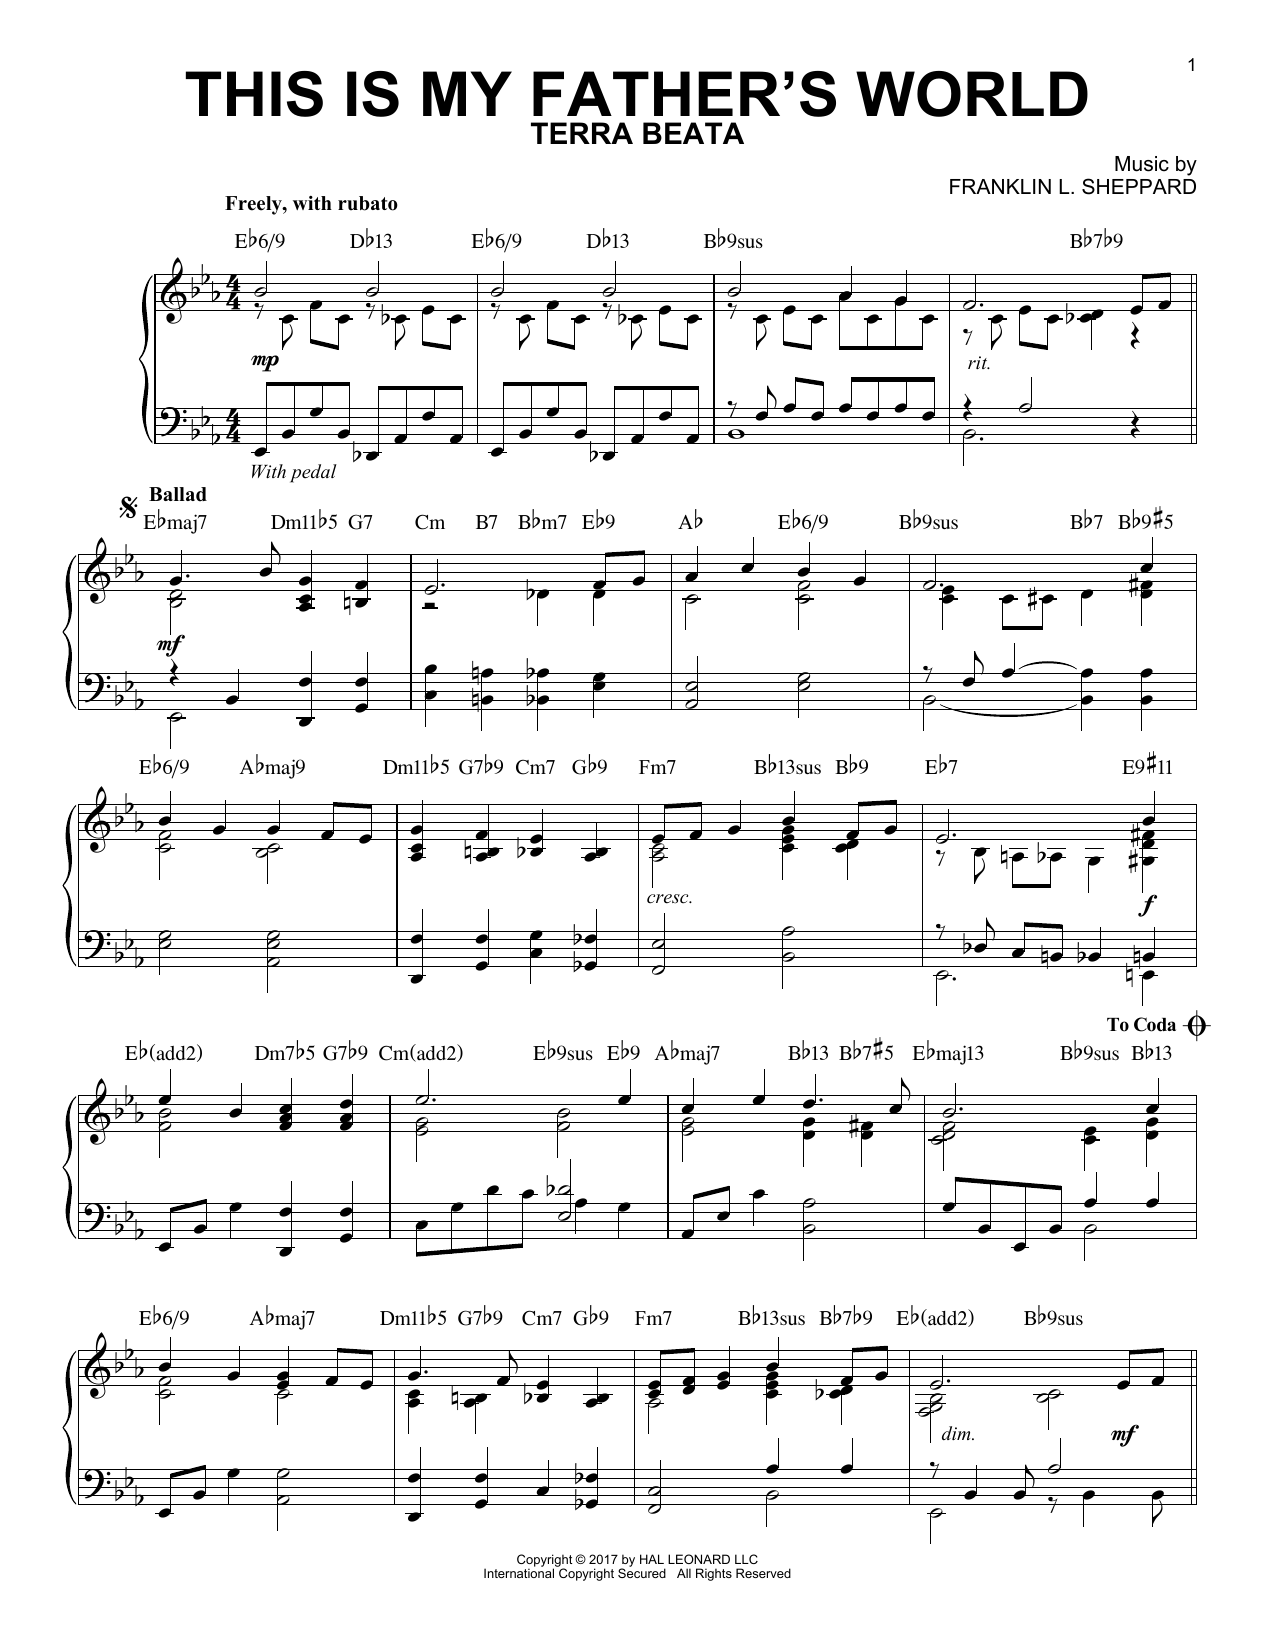 Download Franklin L. Sheppard This Is My Father's World [Jazz version Sheet Music